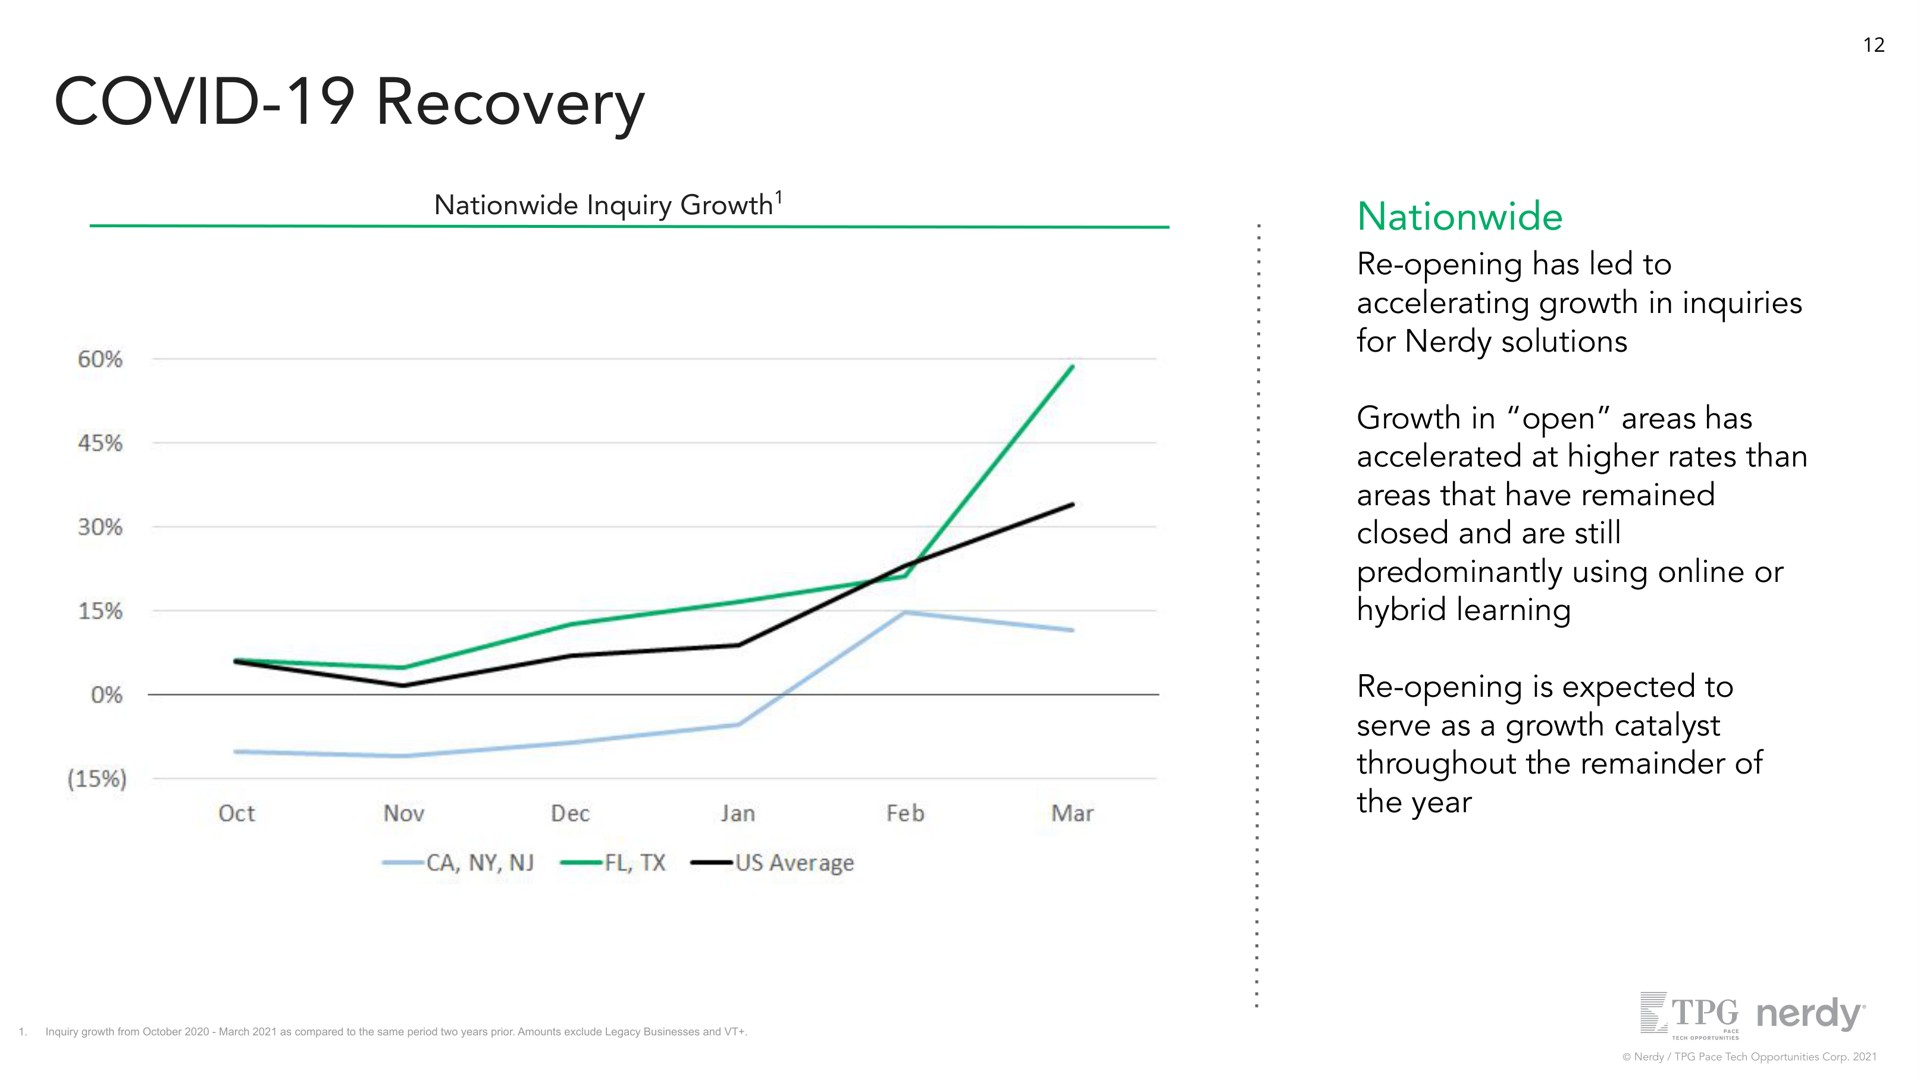 covid recovery nationwide inquiry growth nationwide opening has led to accelerating growth in inquiries for solutions growth in open areas has accelerated at higher rates than areas that have remained closed and are still predominantly using or hybrid learning opening is expected to serve as a growth catalyst throughout the remainder of the year | Nerdy